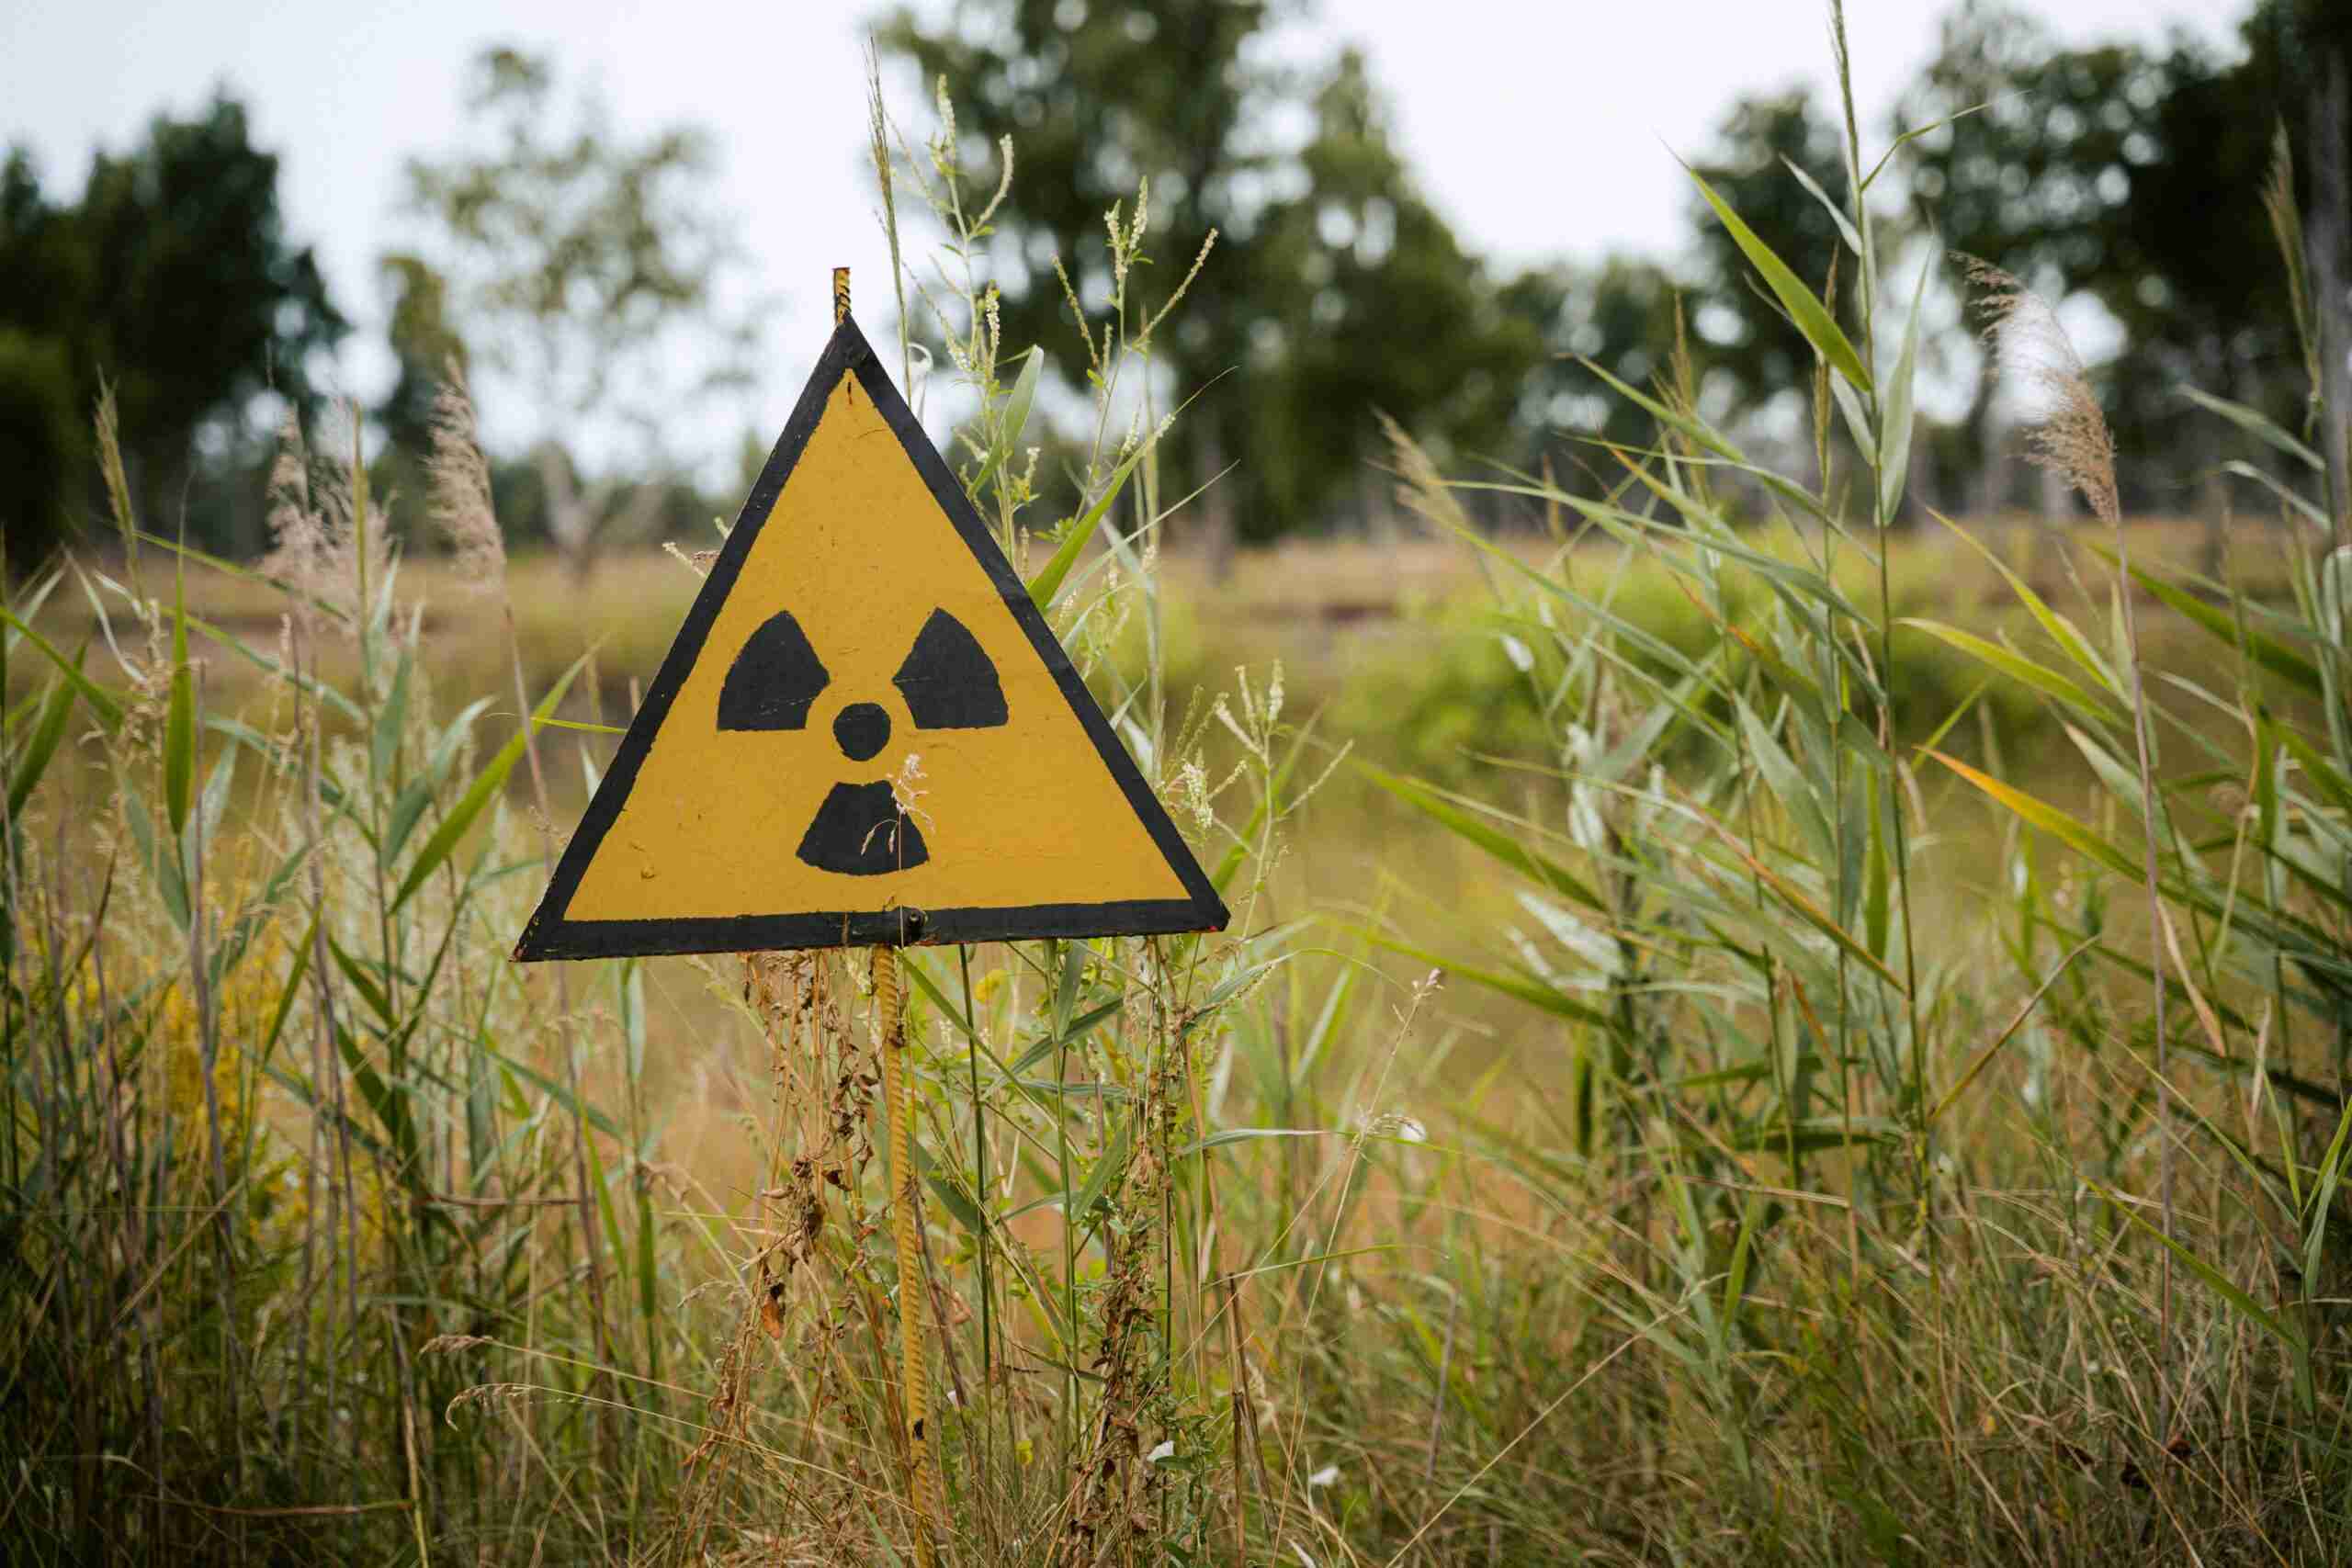 Nuclear waste and radioactive waste